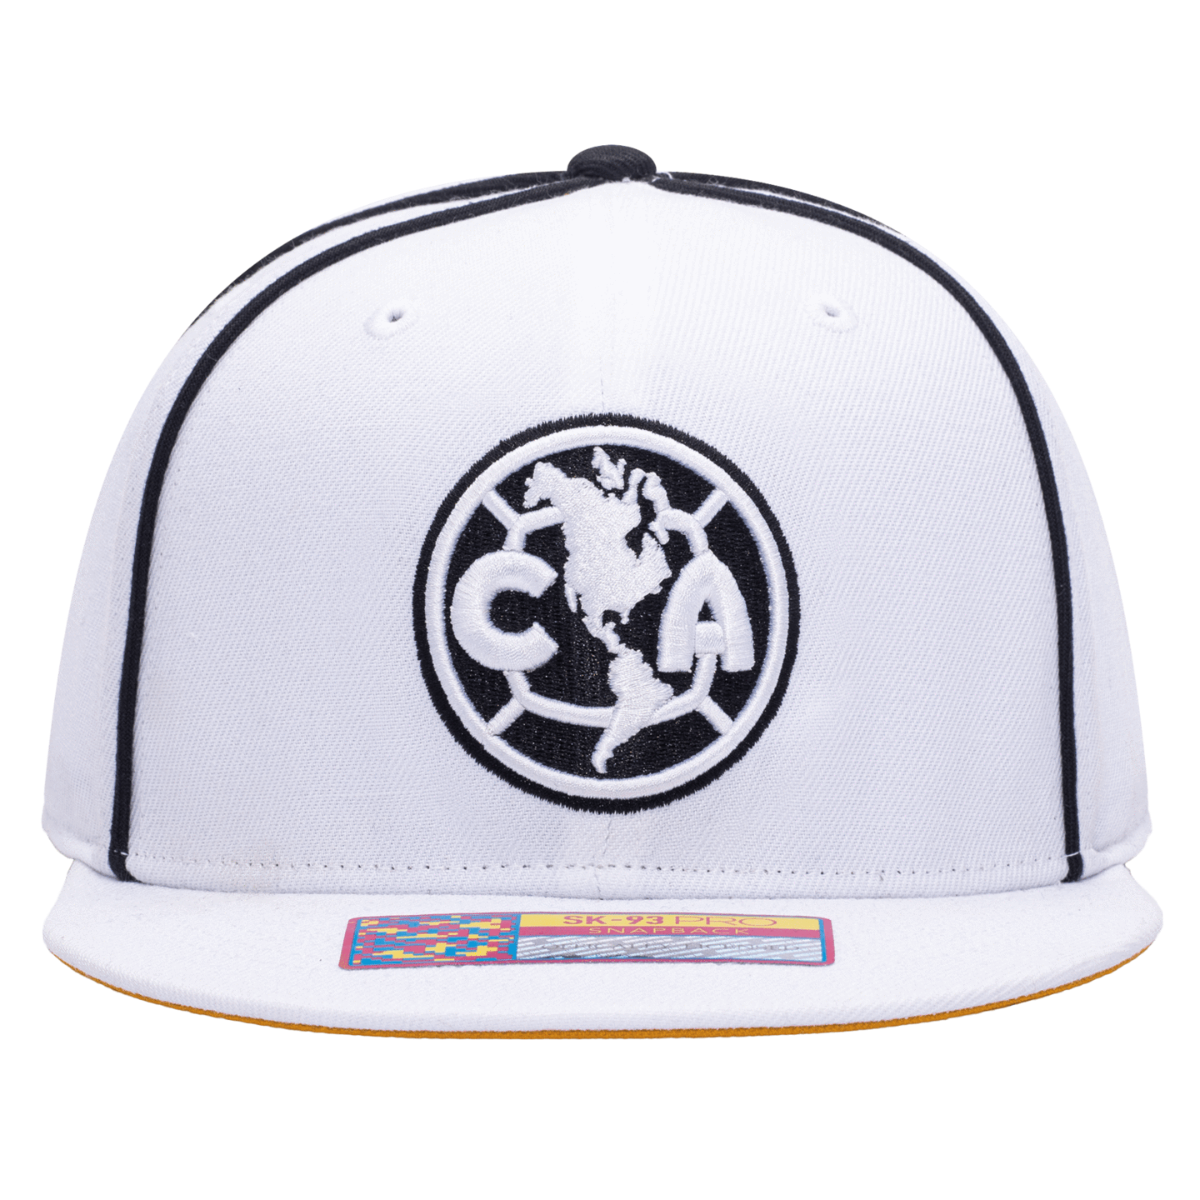 FI Collection Club America Cali Day Snapback Hat - White-Black (Front)